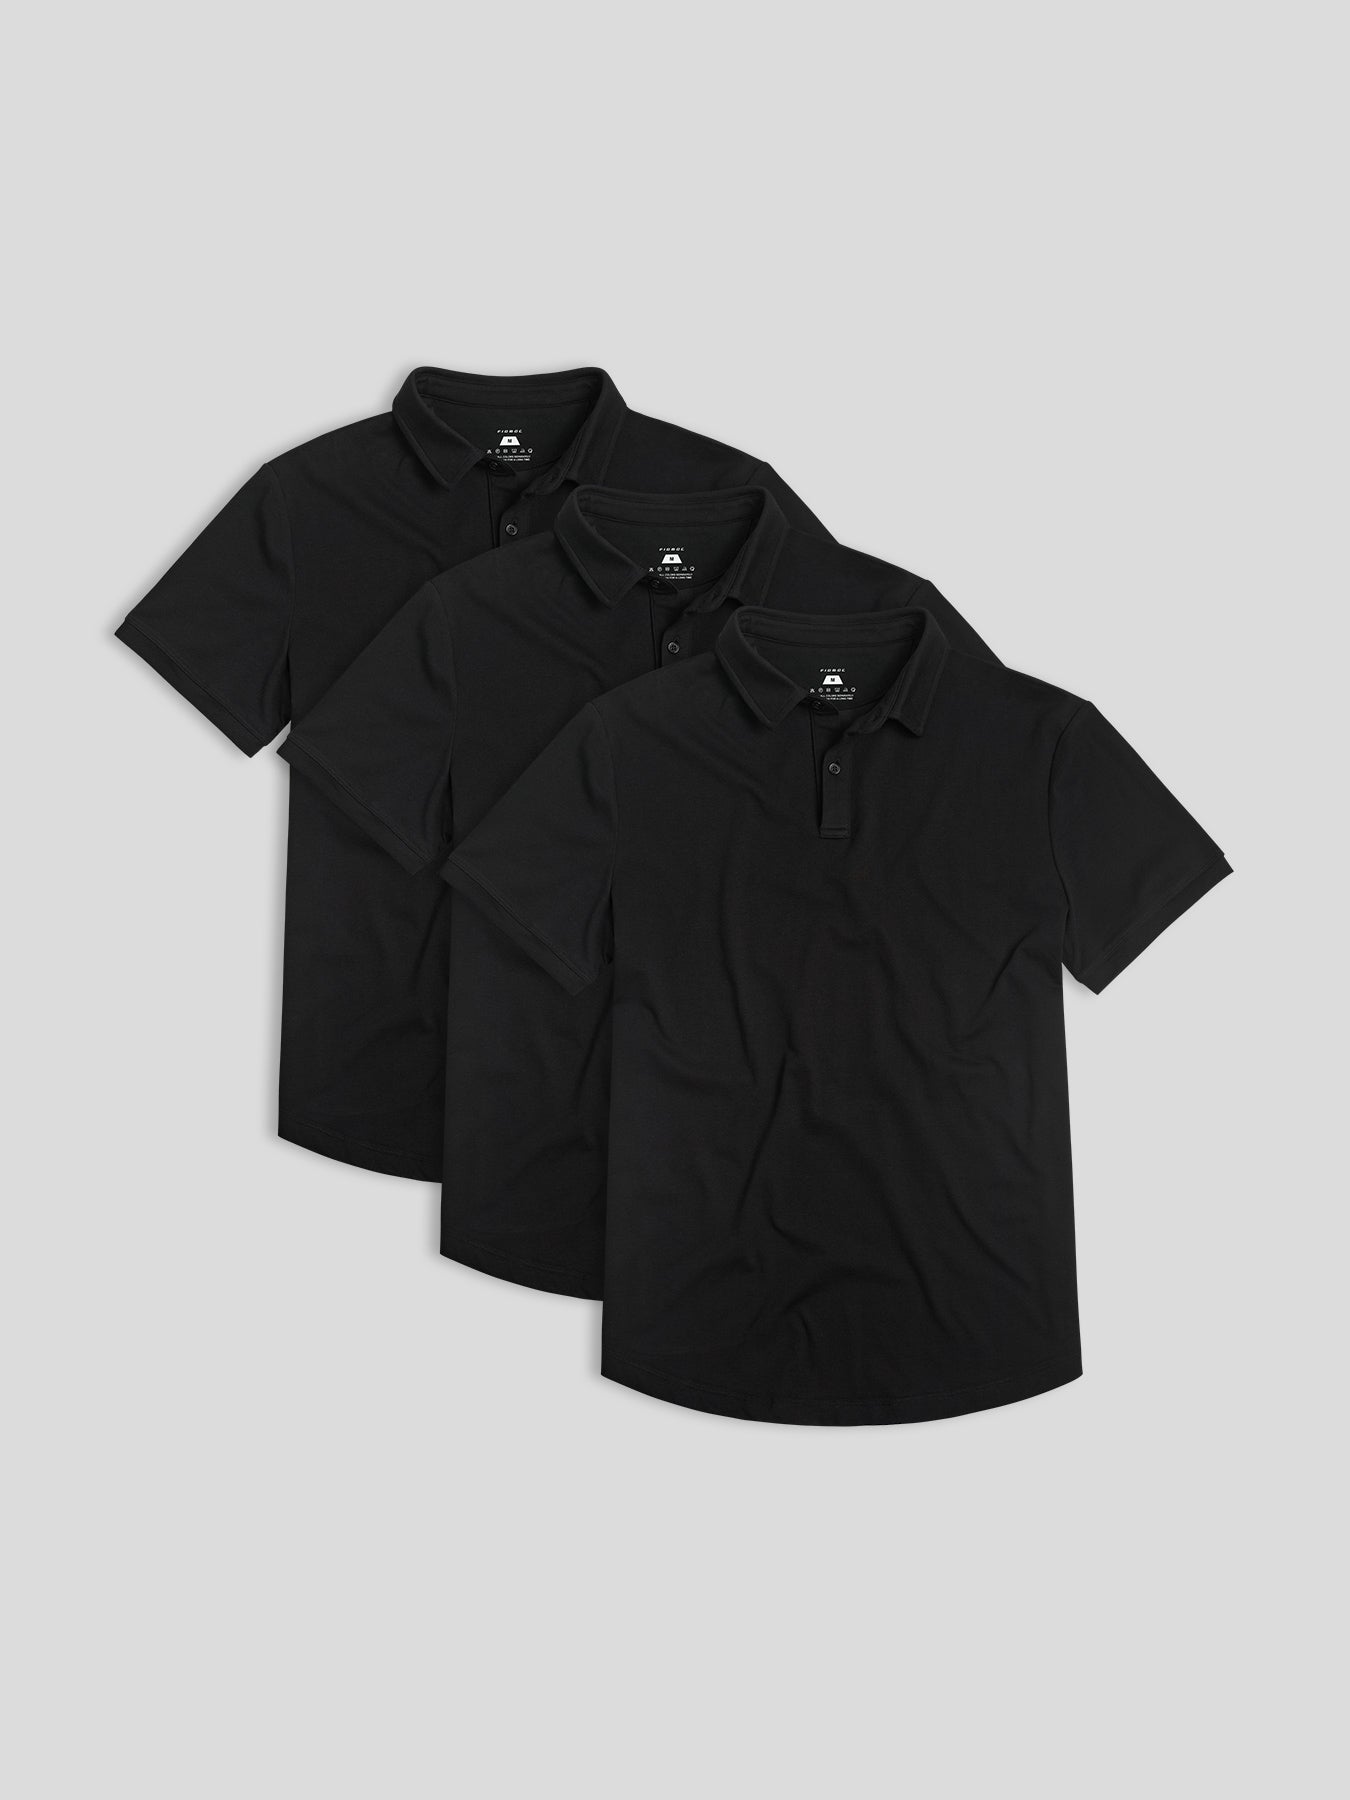 StayCool 2.0 Polo 3-Pack